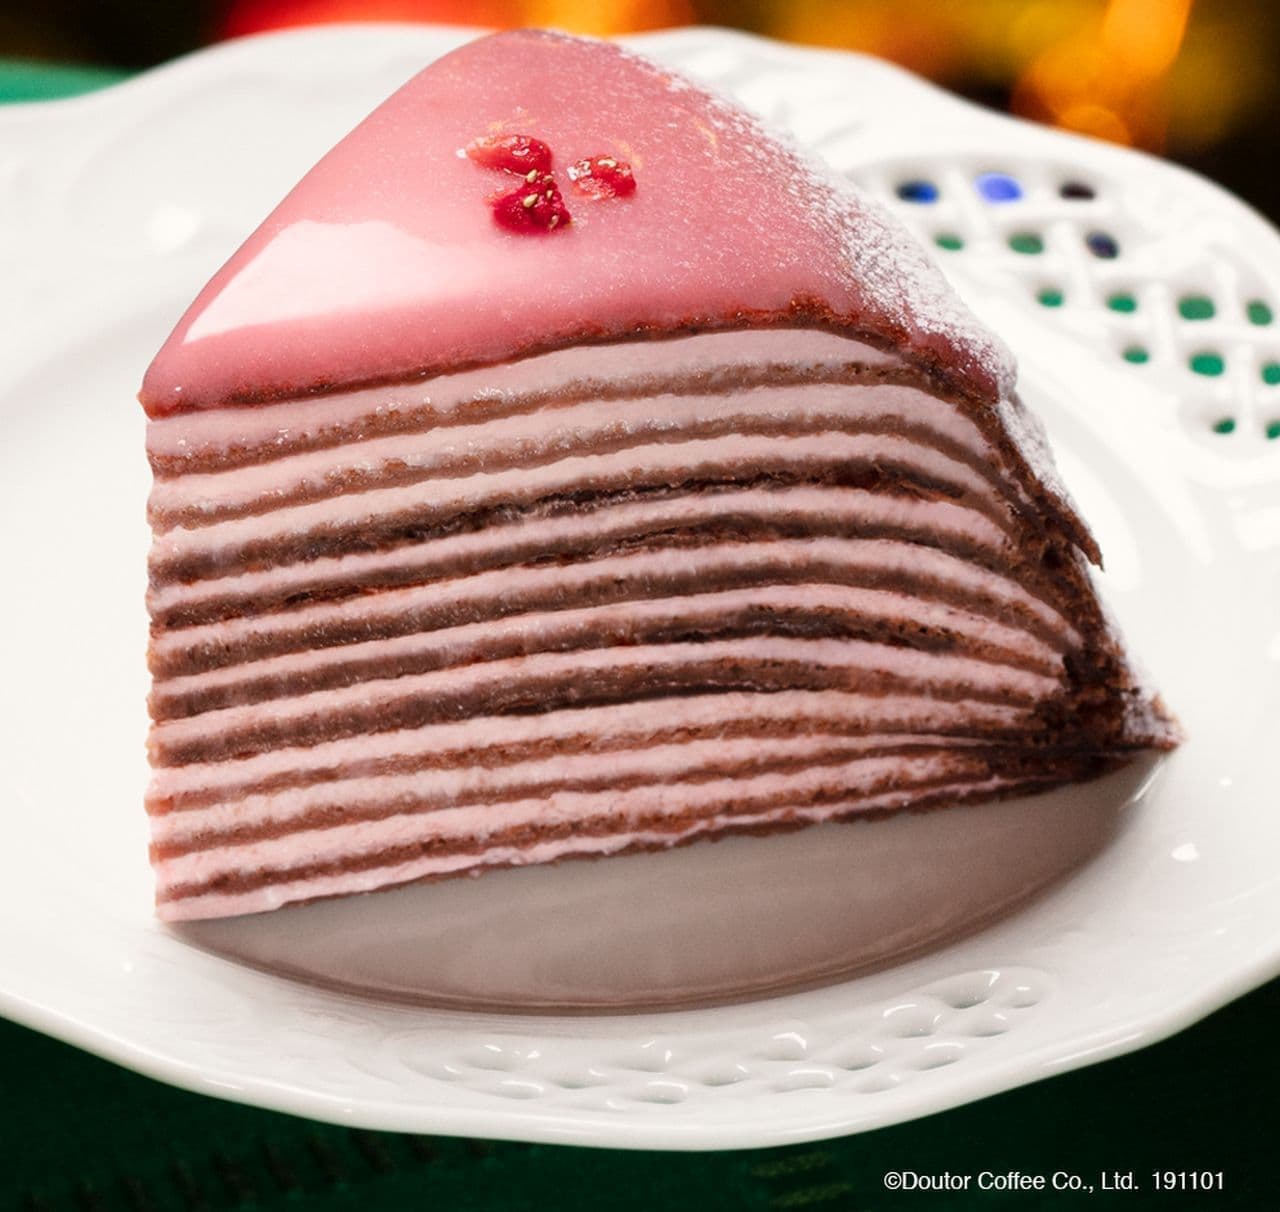 Limited quantity and limited time "Christmas Mille Crepes" in Doutor